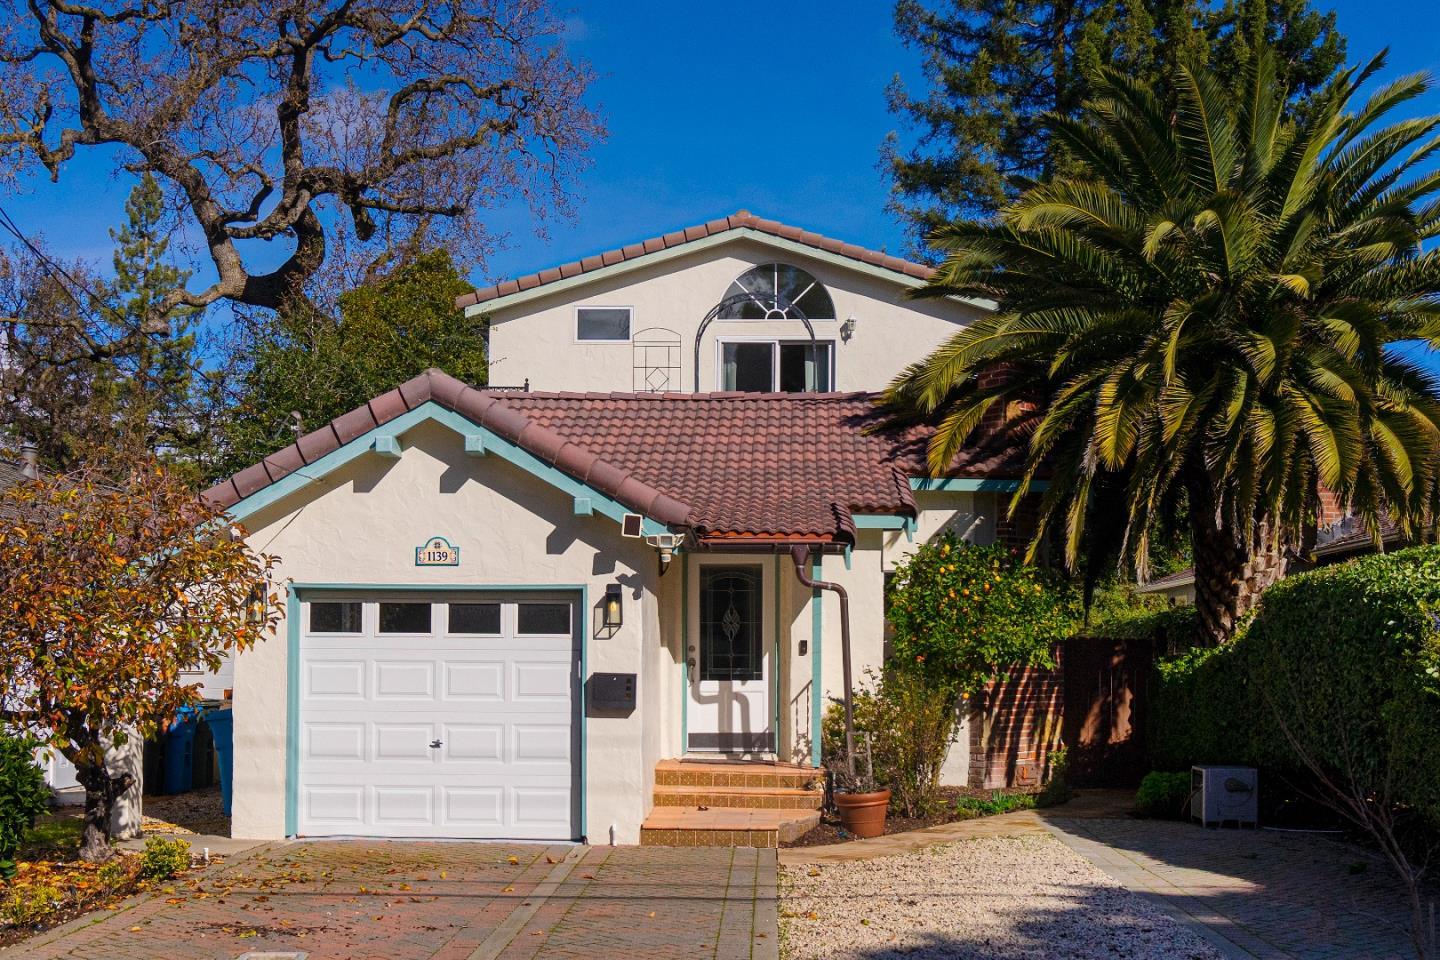 Photo of 1139 King St in Redwood City, CA